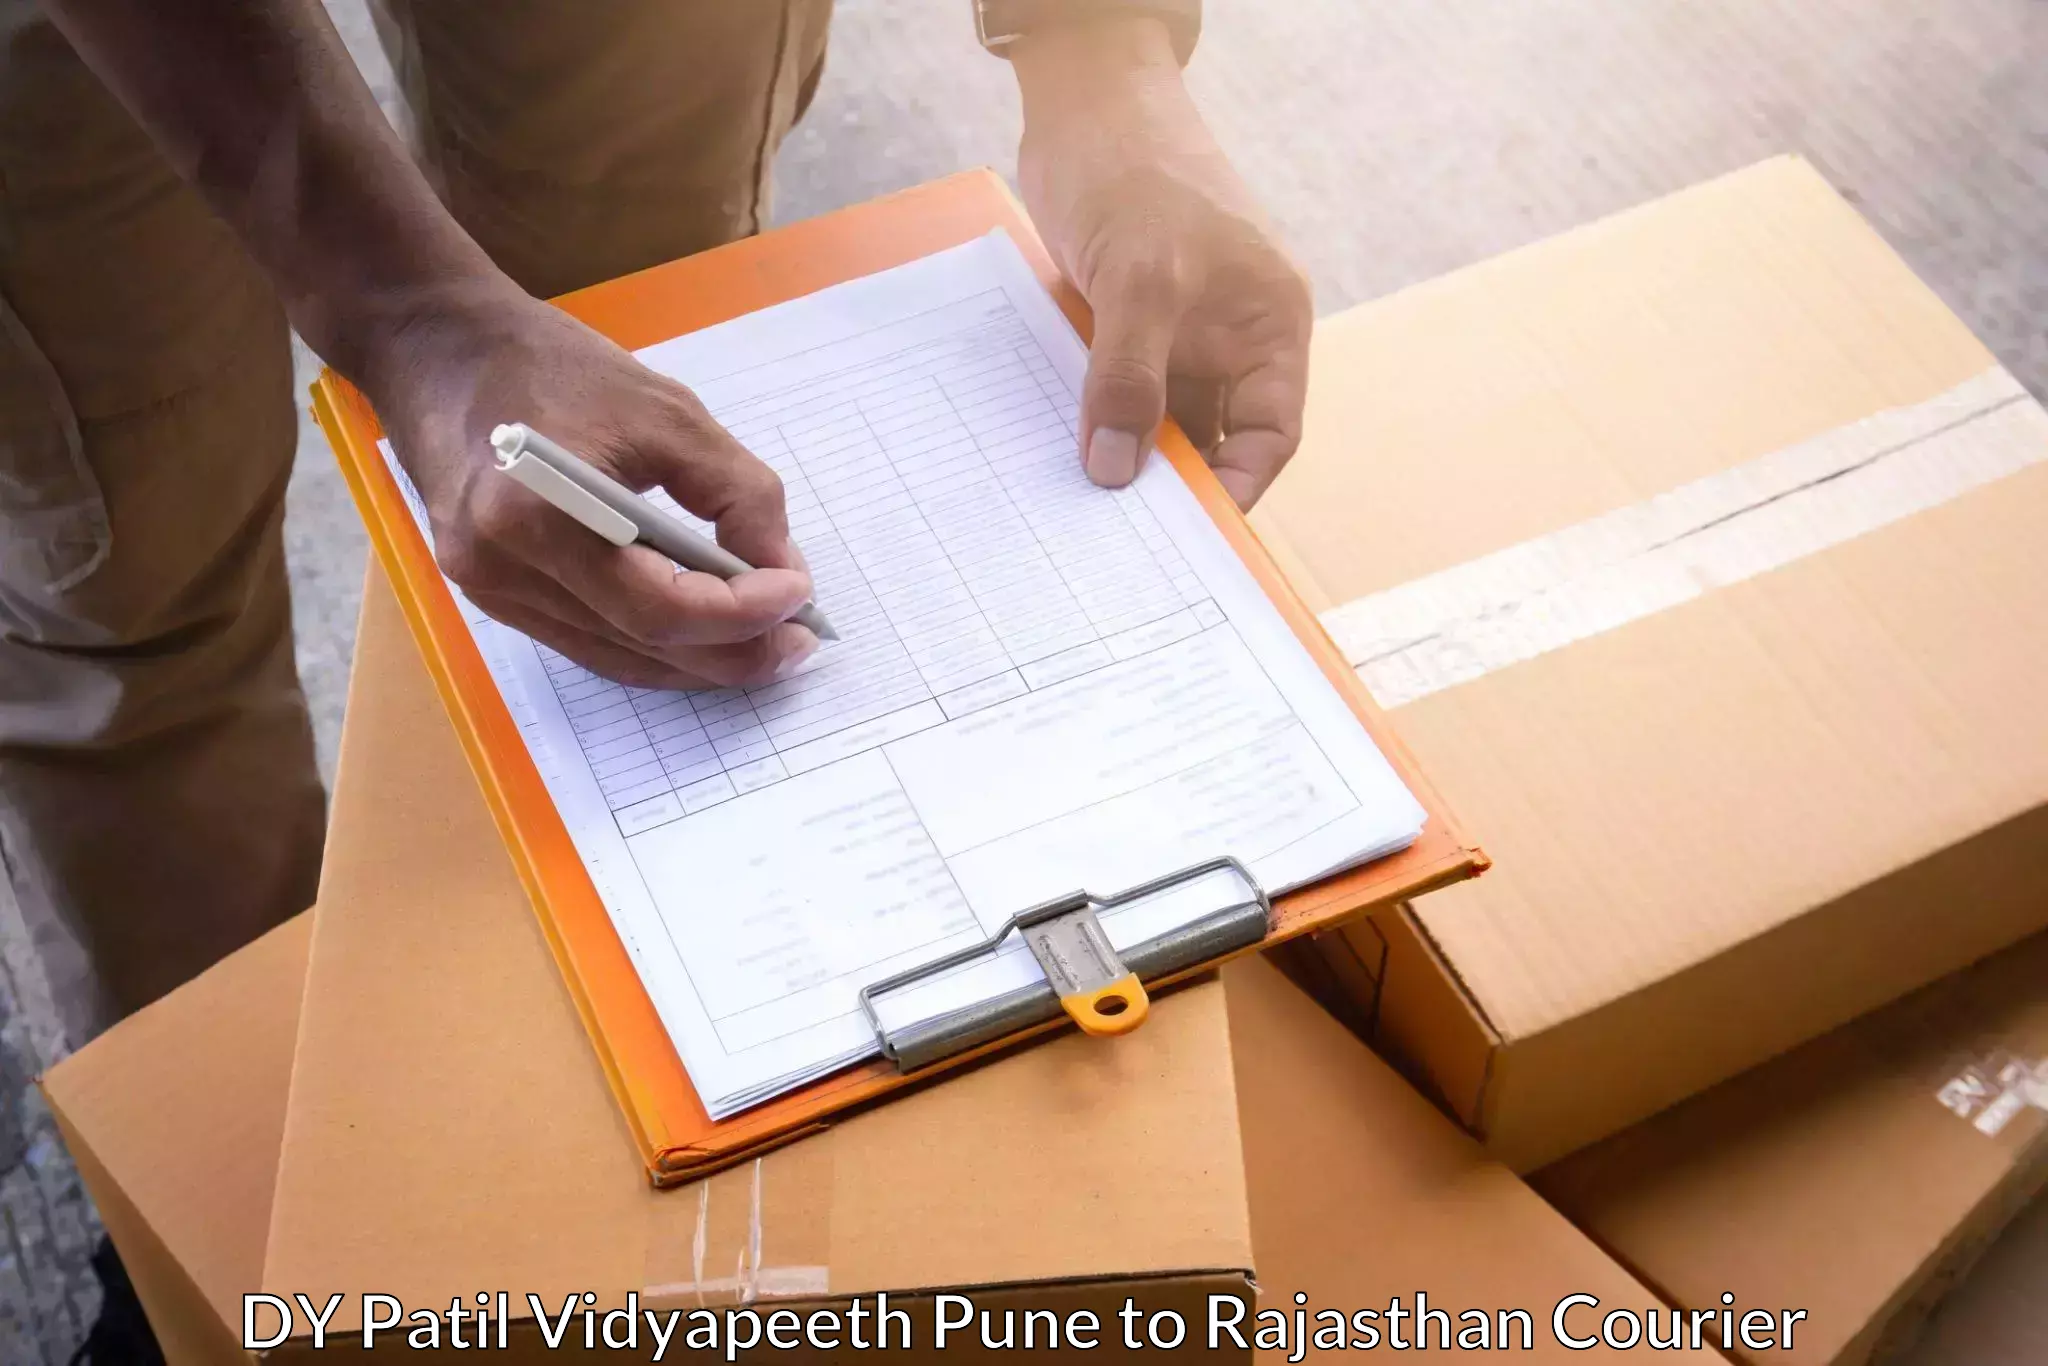 Efficient package consolidation in DY Patil Vidyapeeth Pune to Hanumangarh